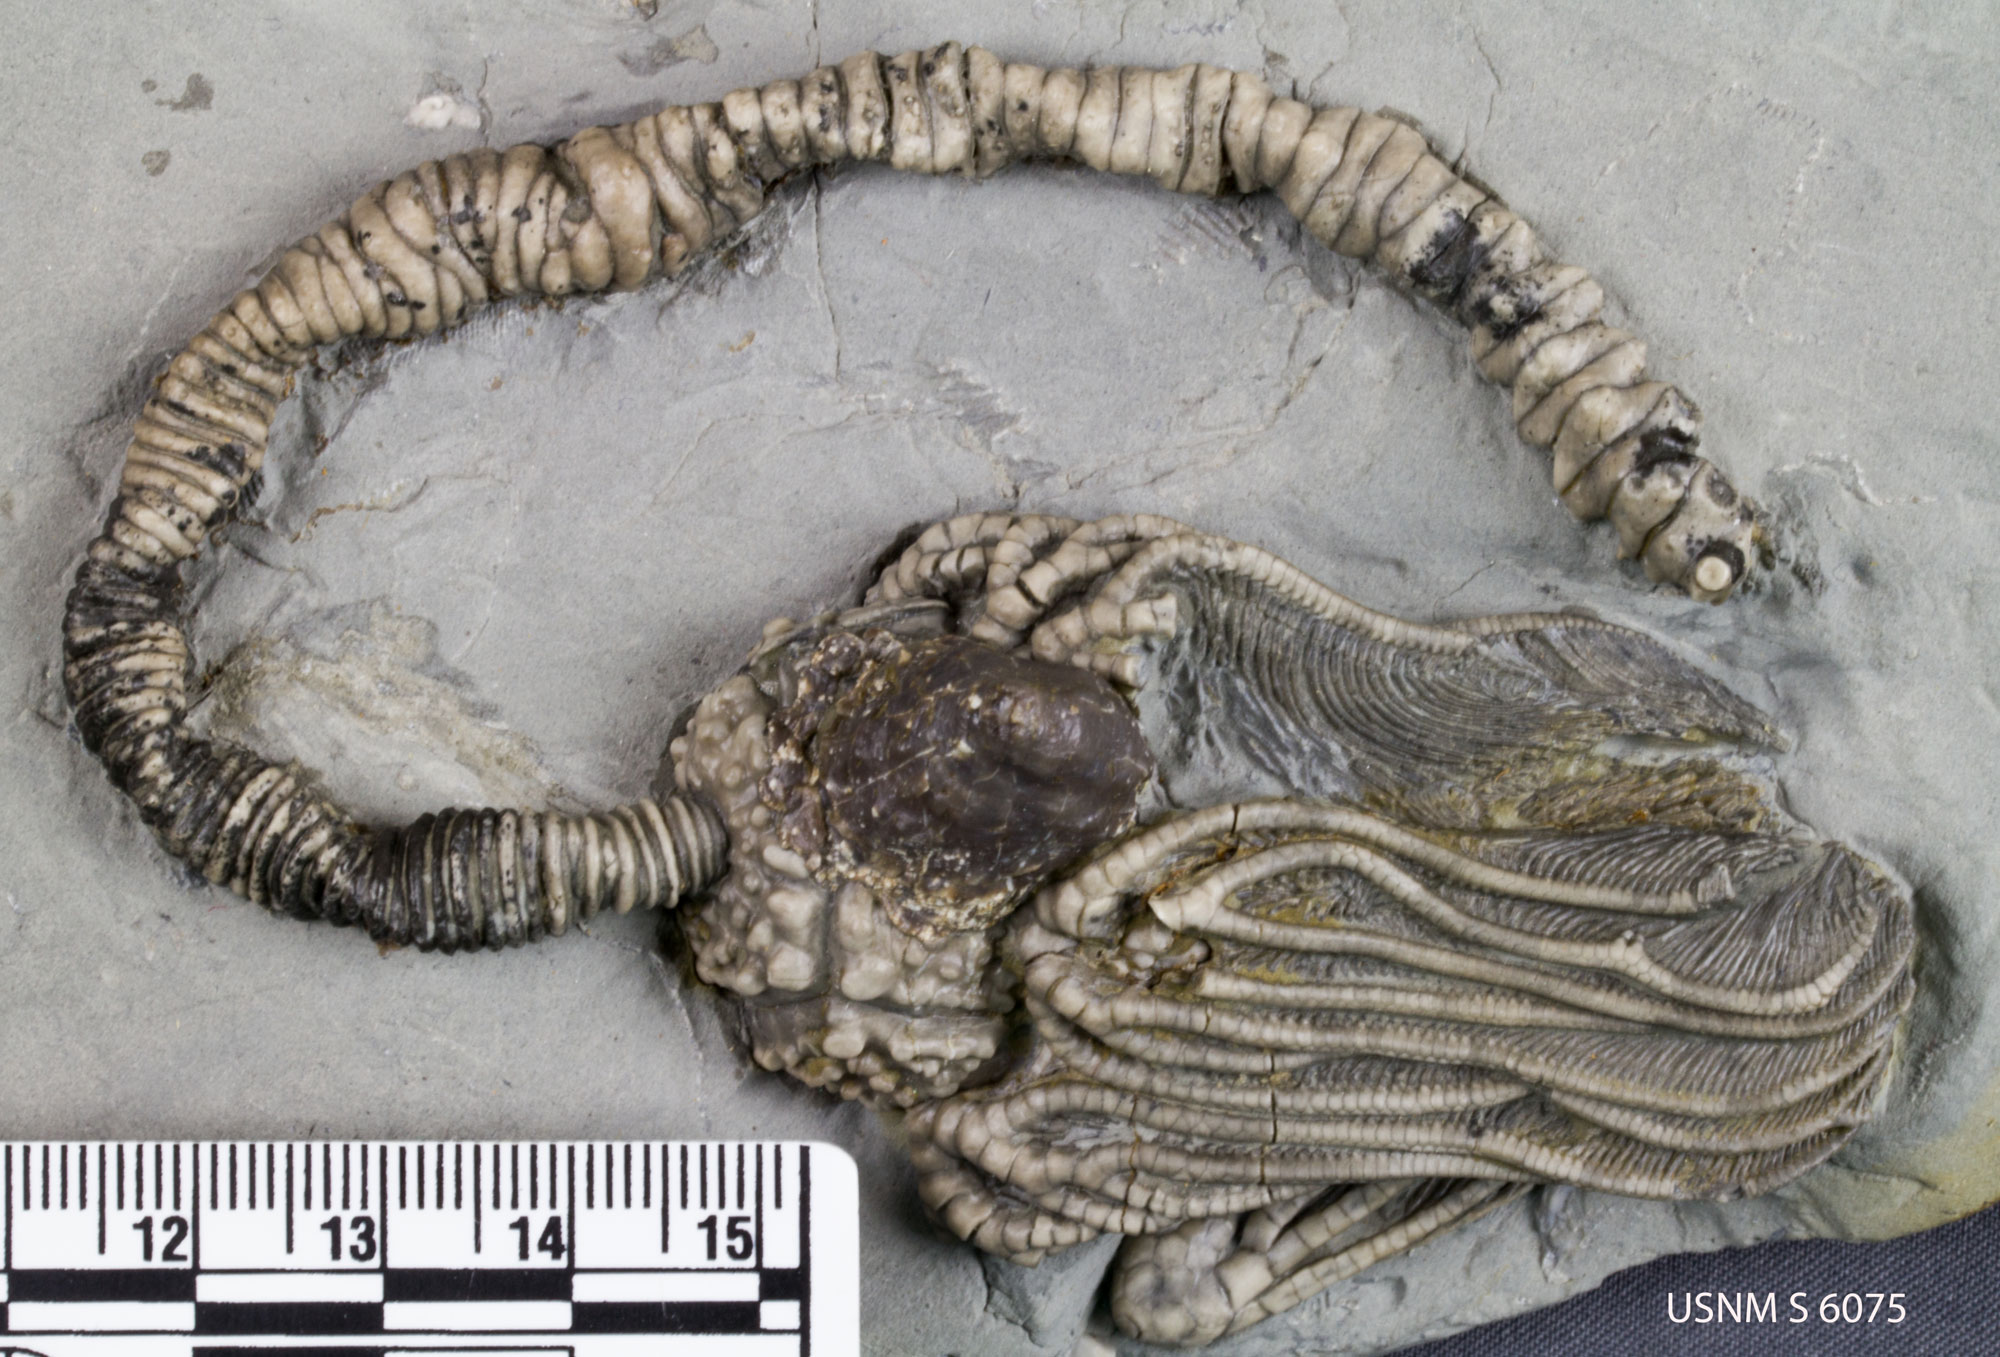 Photograph of a crinoid from the Mississippian of Indiana. The photo shows a crinoid exposed on the surface of a light gray rock. The crinoid is folded back on itself, with in arms pointed to the right and the stalk arching over the top of the calyx and arms. The arms have delicate pinnules preserved.